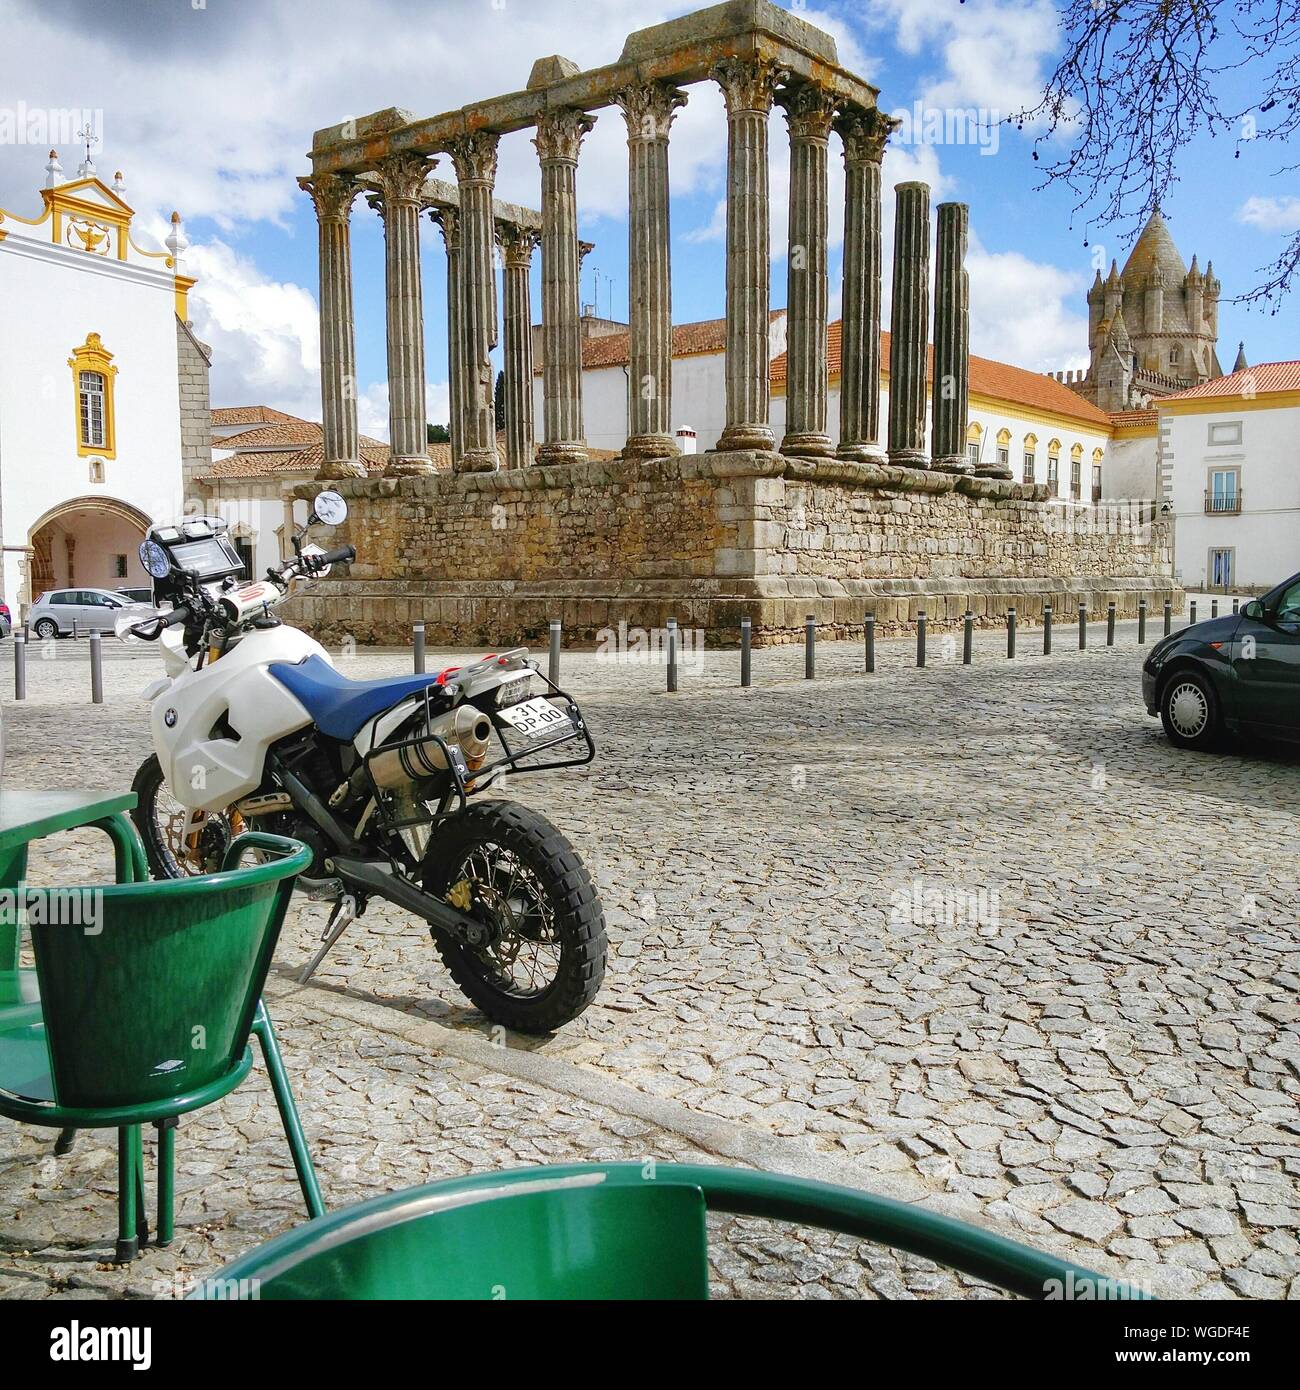 Motorcycle At Ancient Roman Temple In City Stock Photo